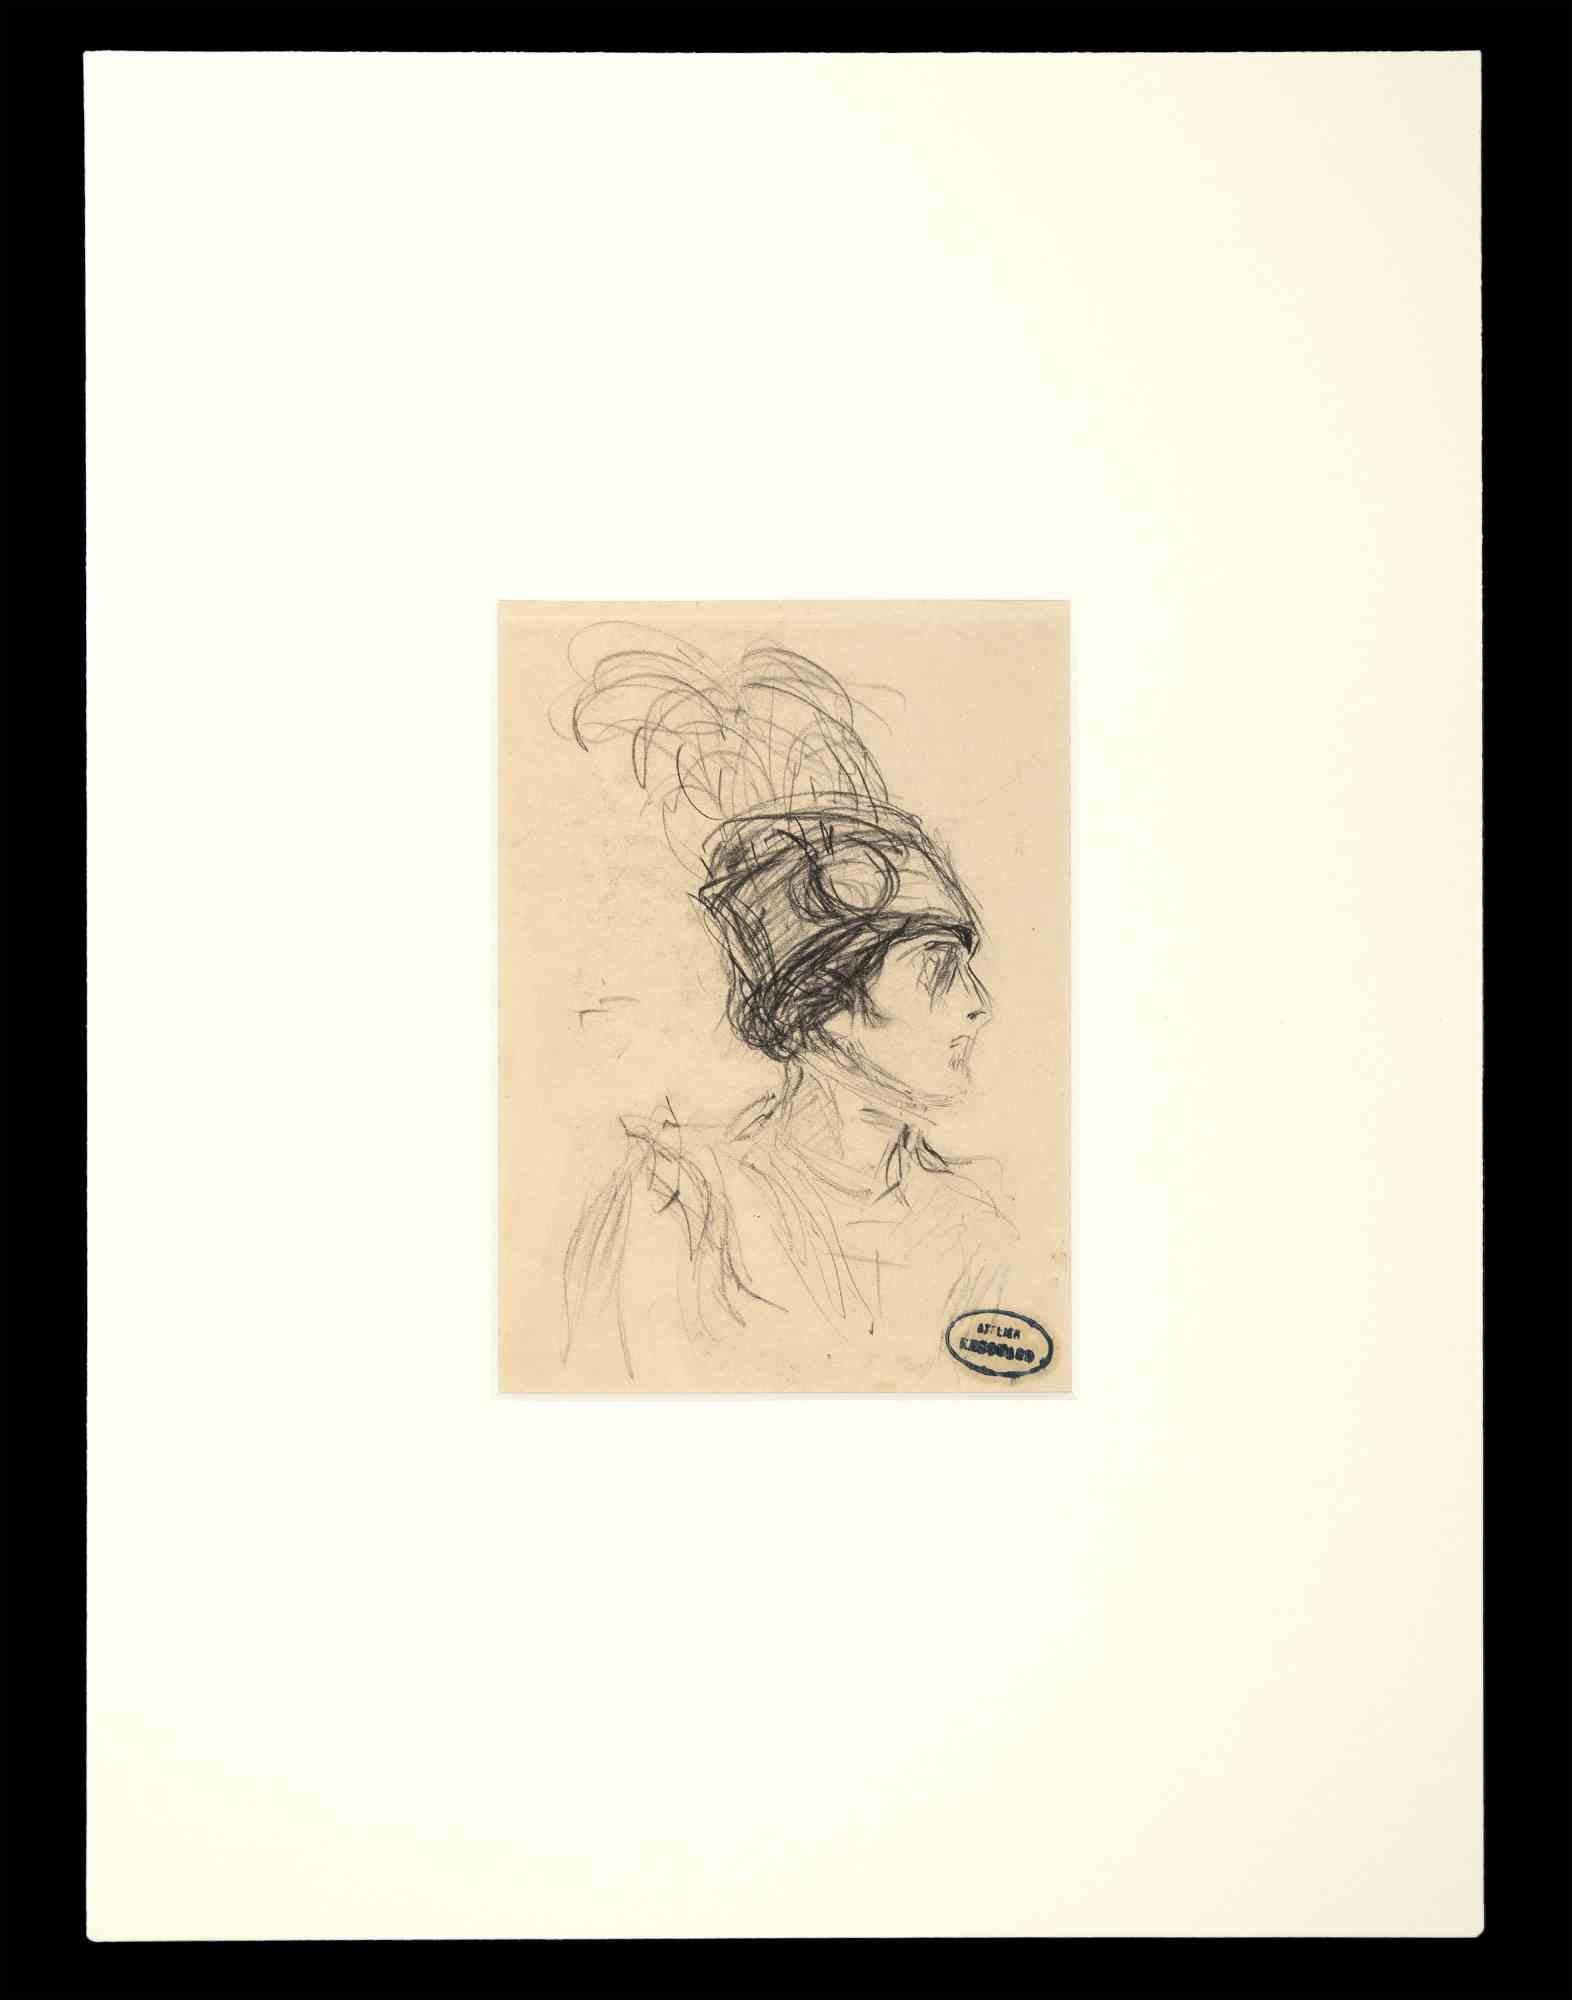 Unknown Figurative Art - Portrait of Woman - Original Drawing - early 20th Century